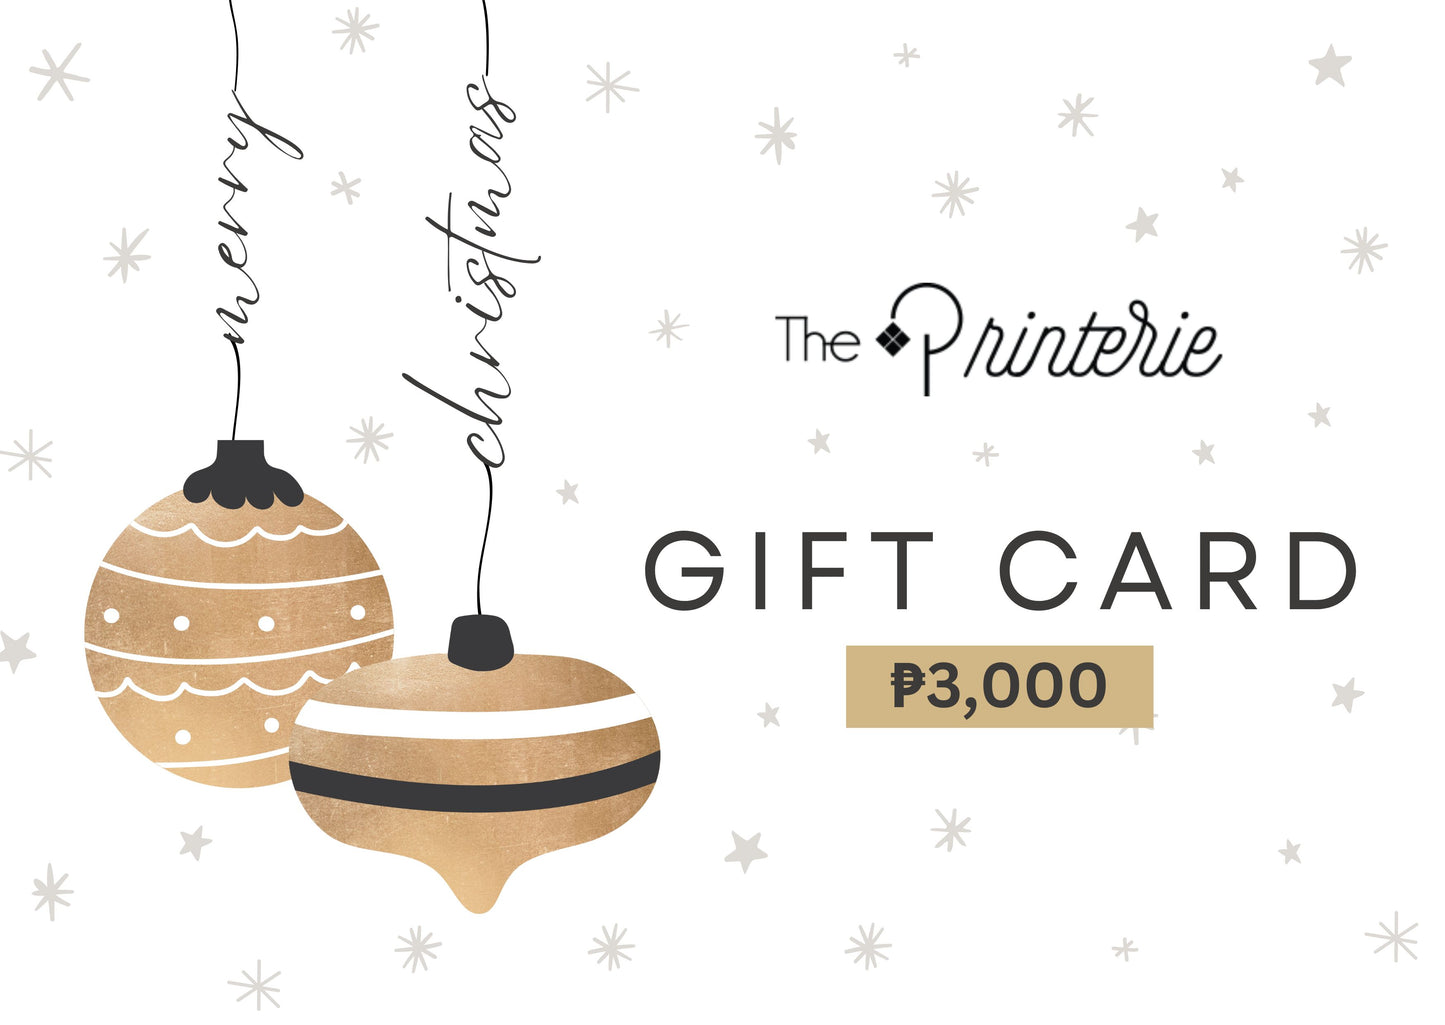 The Printerie Holiday Gift Card